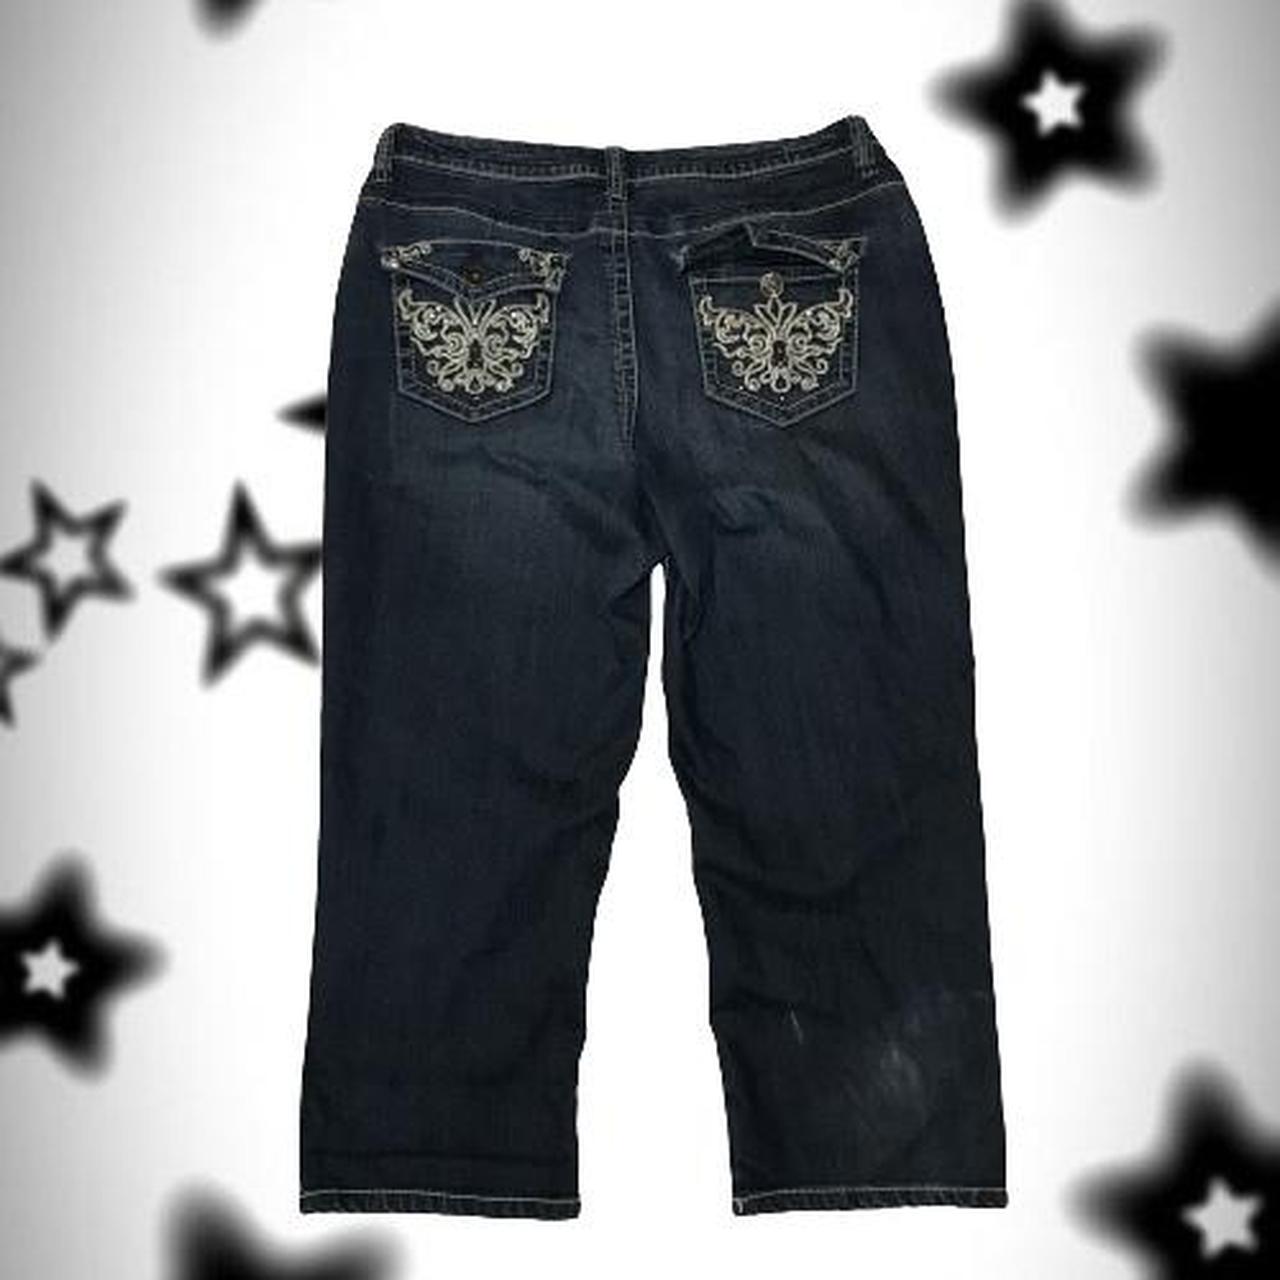 Y2k bling denim capris! These are cute as is but I